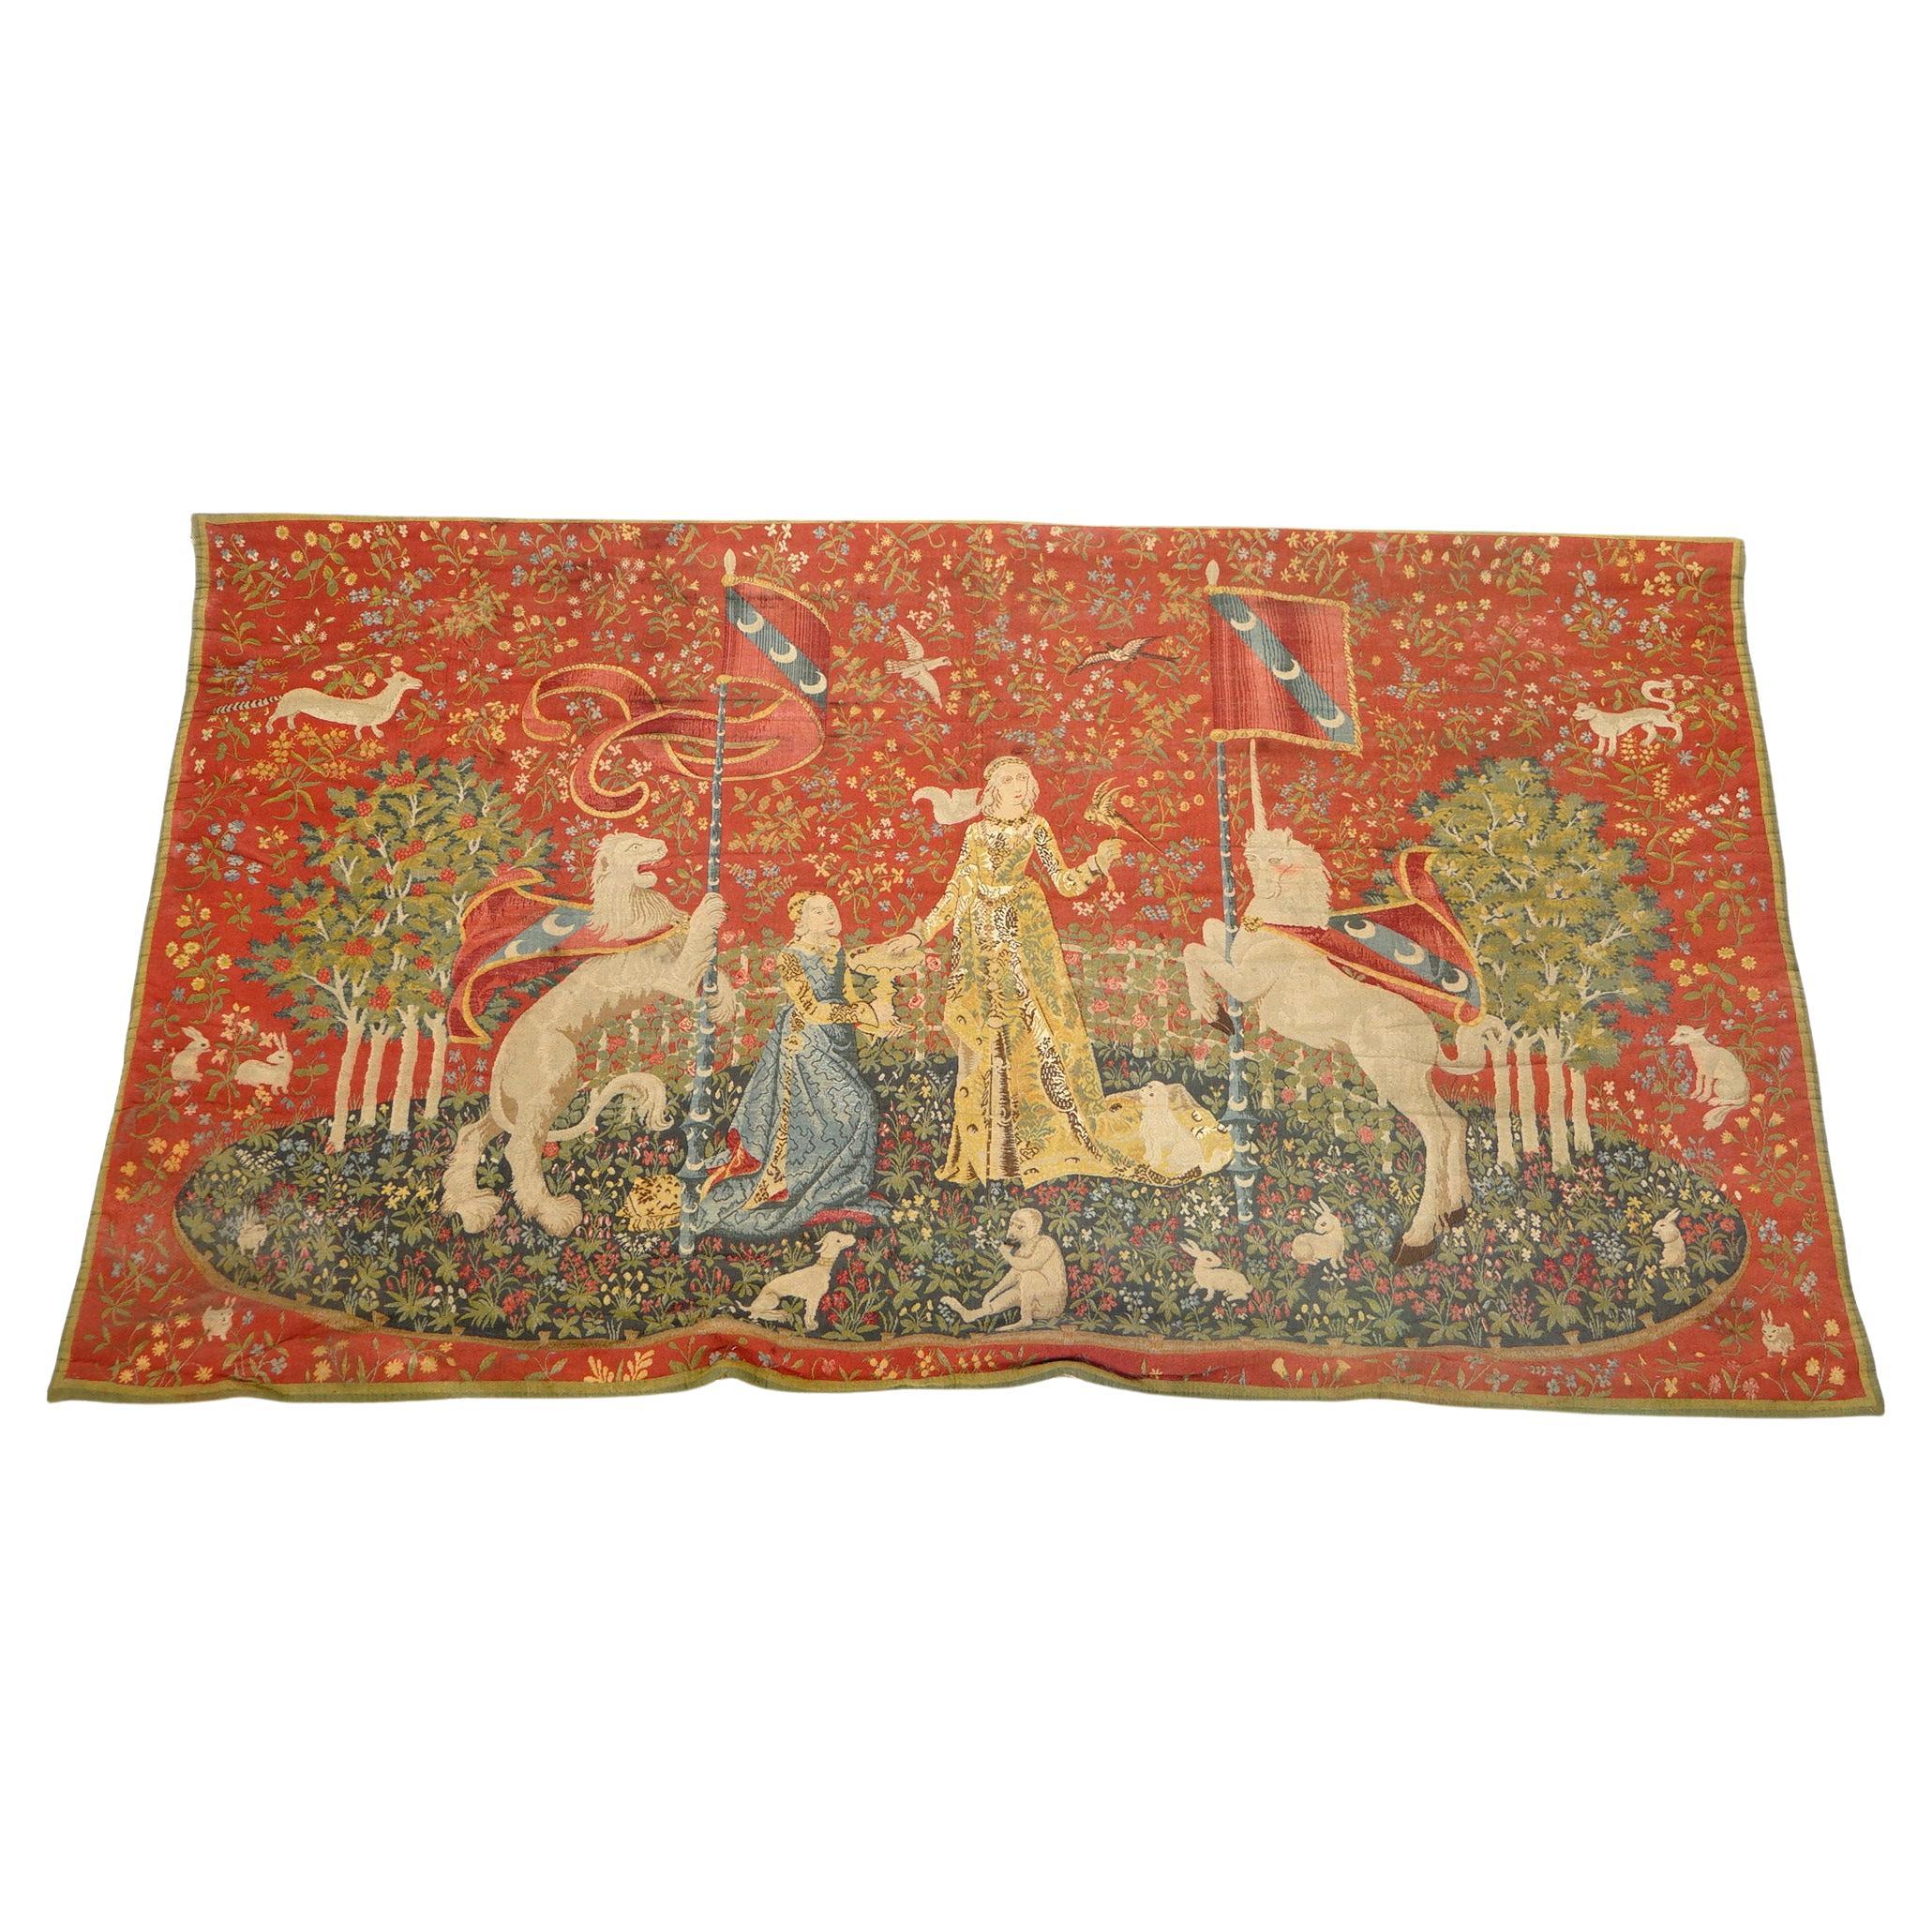 Antique Continental Wall Tapestry, Lady & the Unicorn Sense of Sight, 19th C